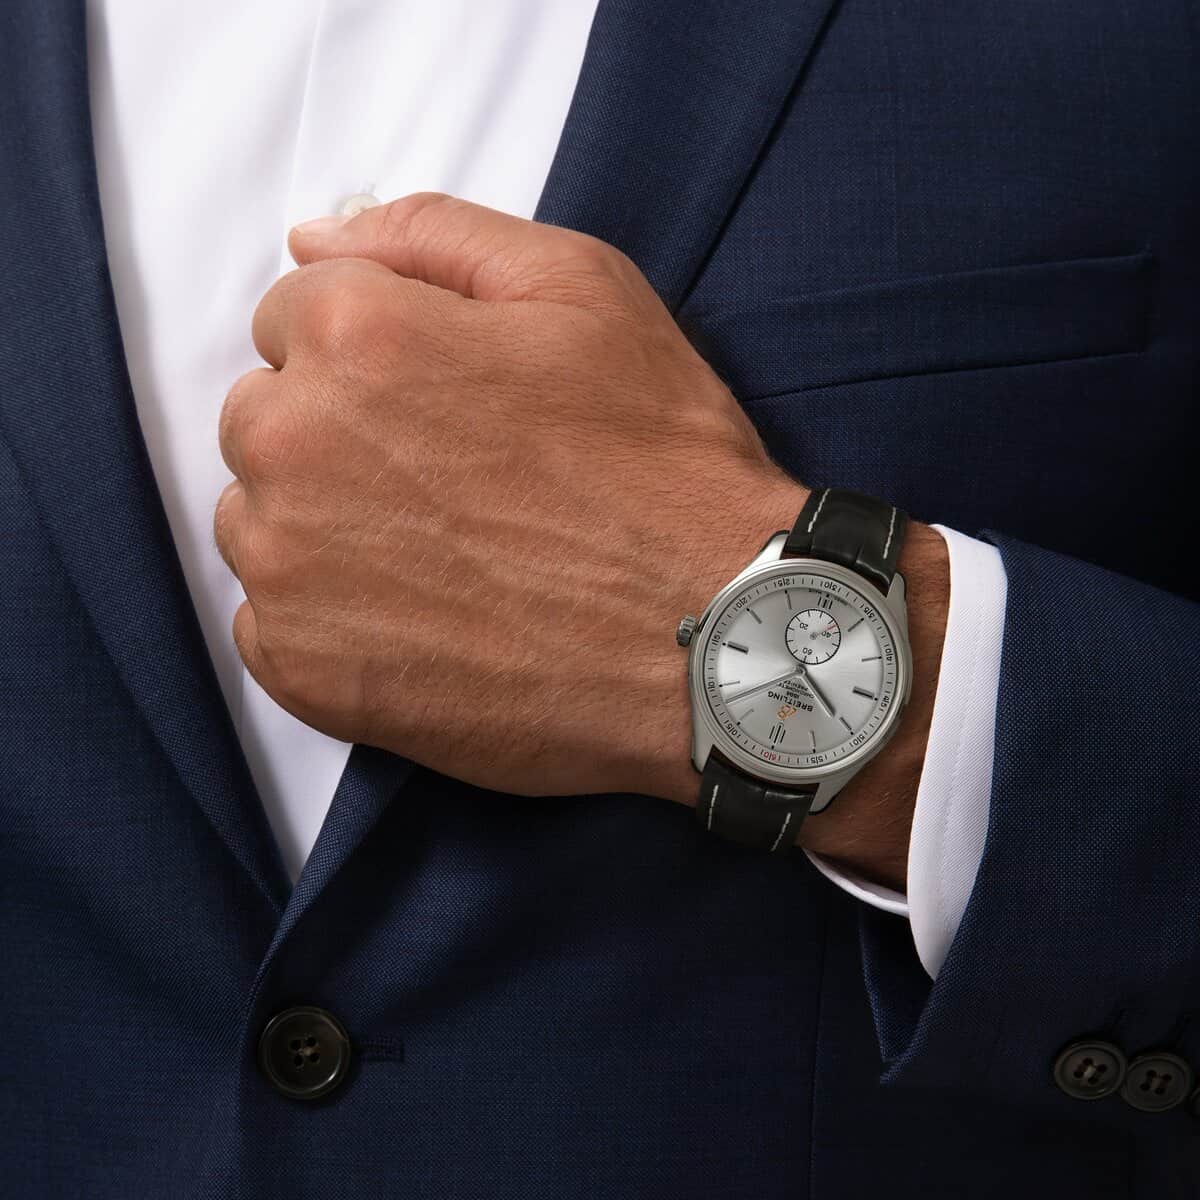 The 25 Best Dress Watches for Men in 2022